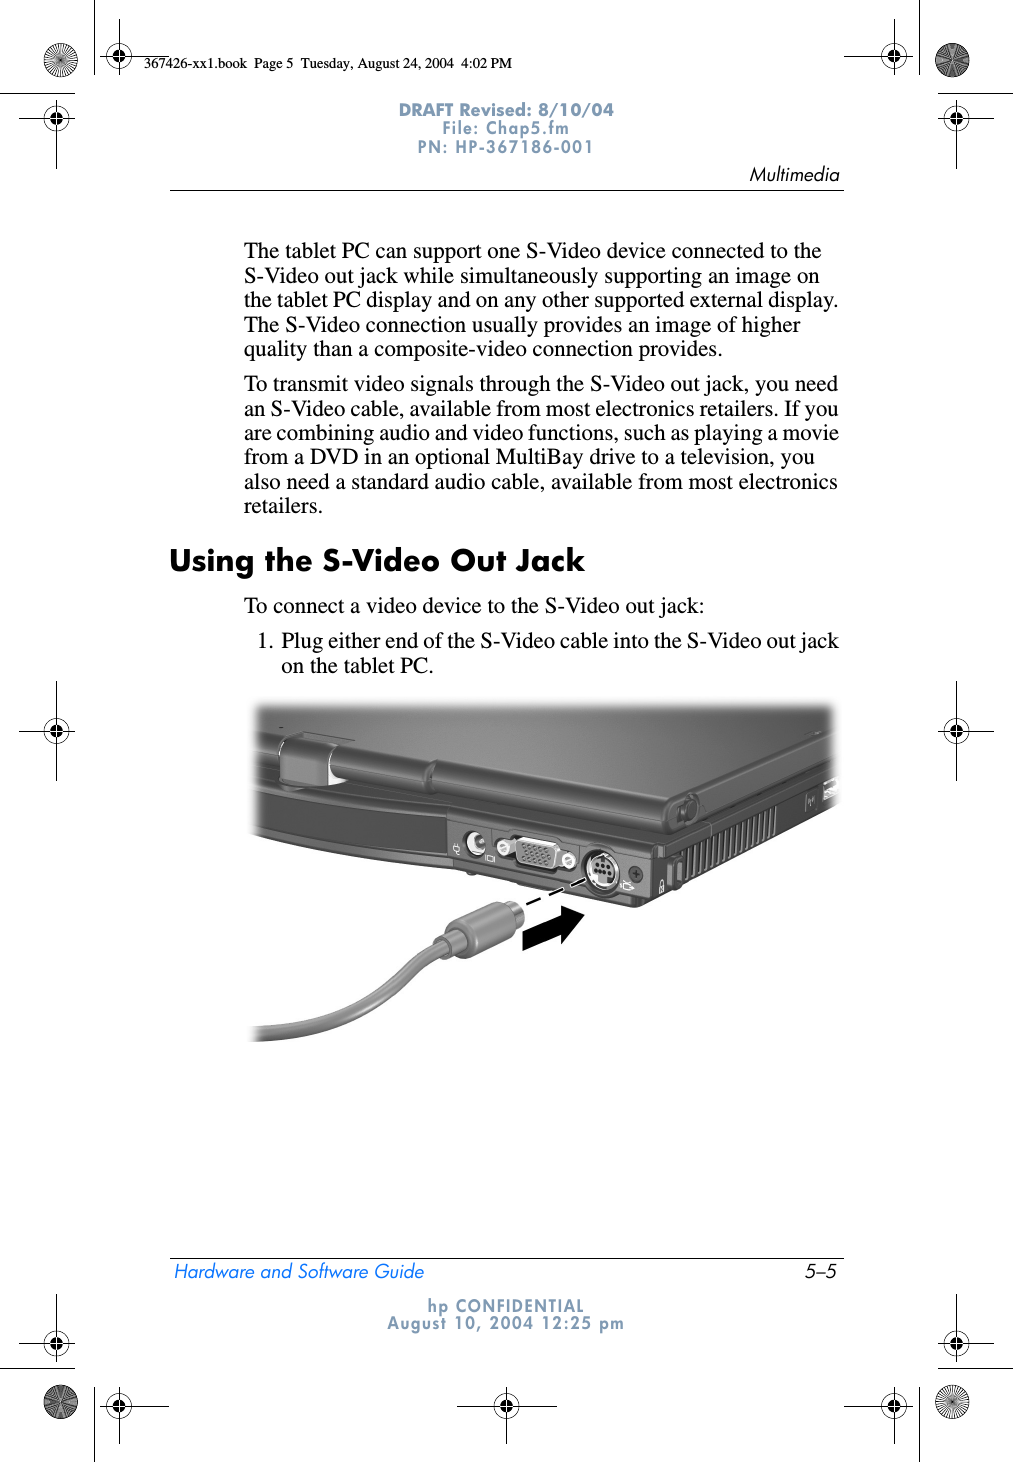 MultimediaHardware and Software Guide 5–5DRAFT Revised: 8/10/04File: Chap5.fm PN: HP-367186-001 hp CONFIDENTIALAugust 10, 2004 12:25 pmThe tablet PC can support one S-Video device connected to the S-Video out jack while simultaneously supporting an image on the tablet PC display and on any other supported external display. The S-Video connection usually provides an image of higher quality than a composite-video connection provides.To transmit video signals through the S-Video out jack, you need an S-Video cable, available from most electronics retailers. If you are combining audio and video functions, such as playing a movie from a DVD in an optional MultiBay drive to a television, you also need a standard audio cable, available from most electronics retailers.Using the S-Video Out JackTo connect a video device to the S-Video out jack:1. Plug either end of the S-Video cable into the S-Video out jack on the tablet PC.367426-xx1.book  Page 5  Tuesday, August 24, 2004  4:02 PM